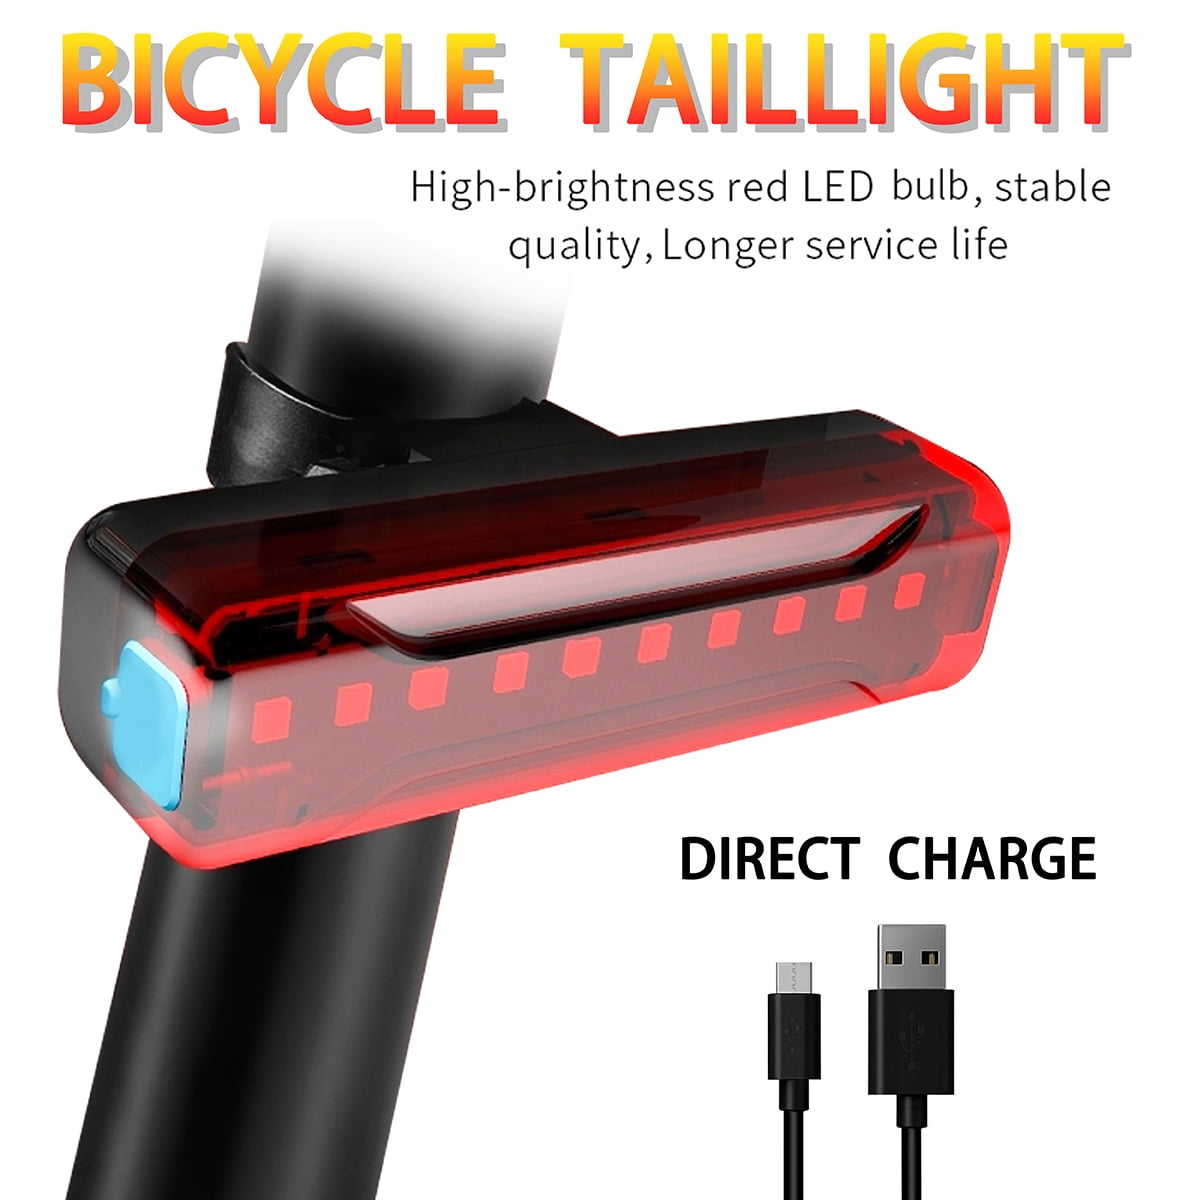 Quality USB Rechargeable 100LM LED Bike Tail Warning Light with USB Cable Bicycle Accessories for Night Cycling Bicycle Rear Light 